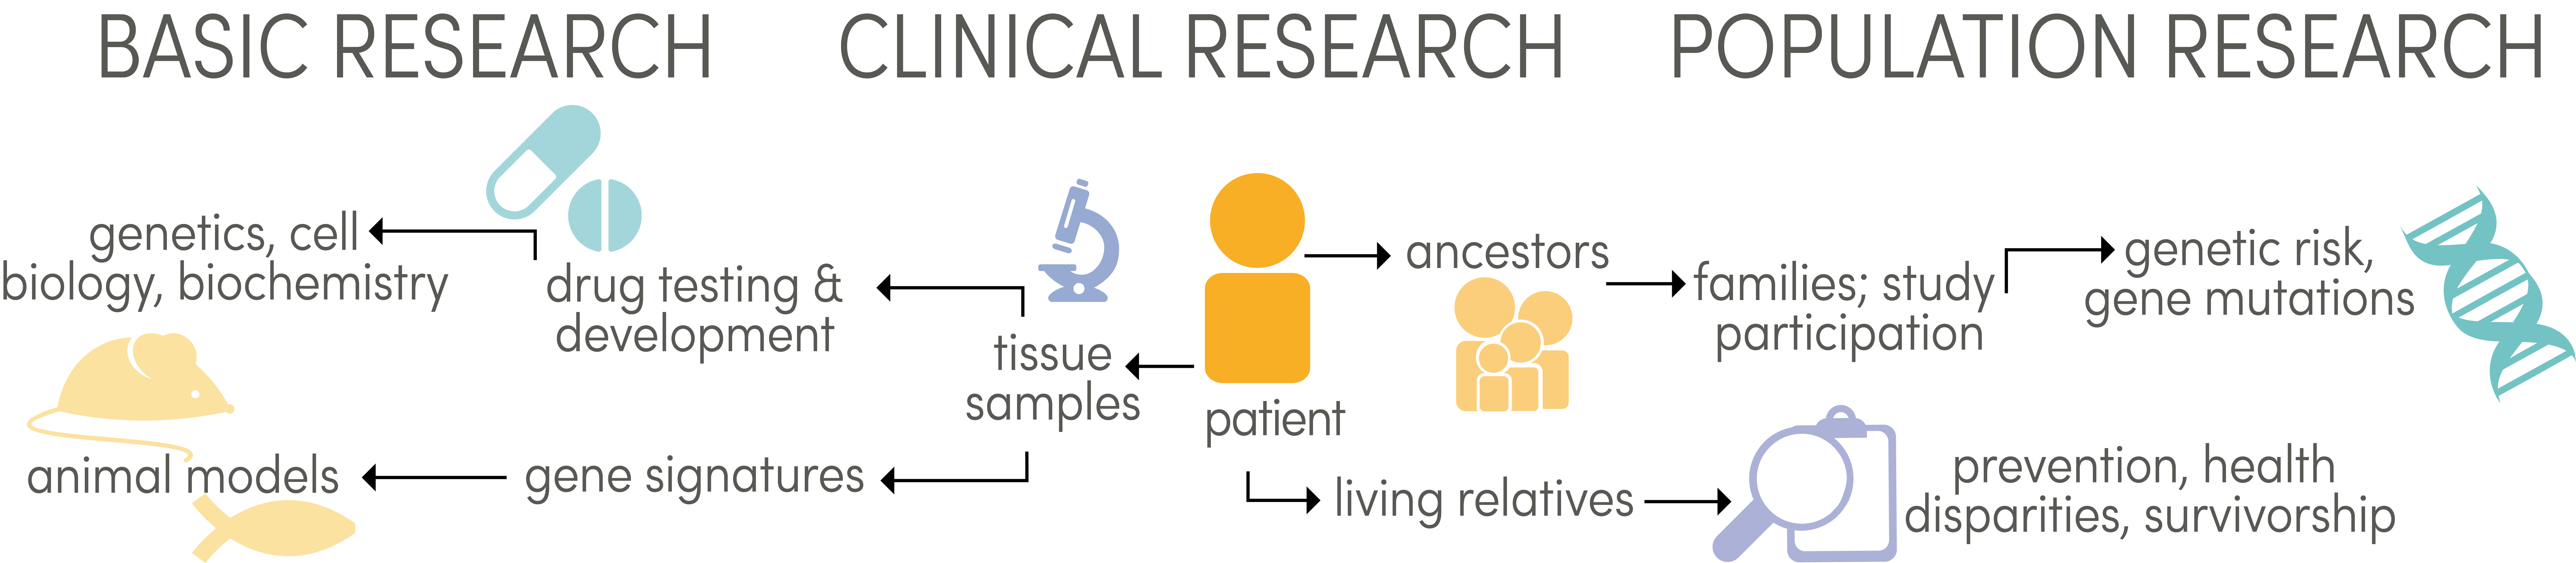 Infographic showing the types of cancer research